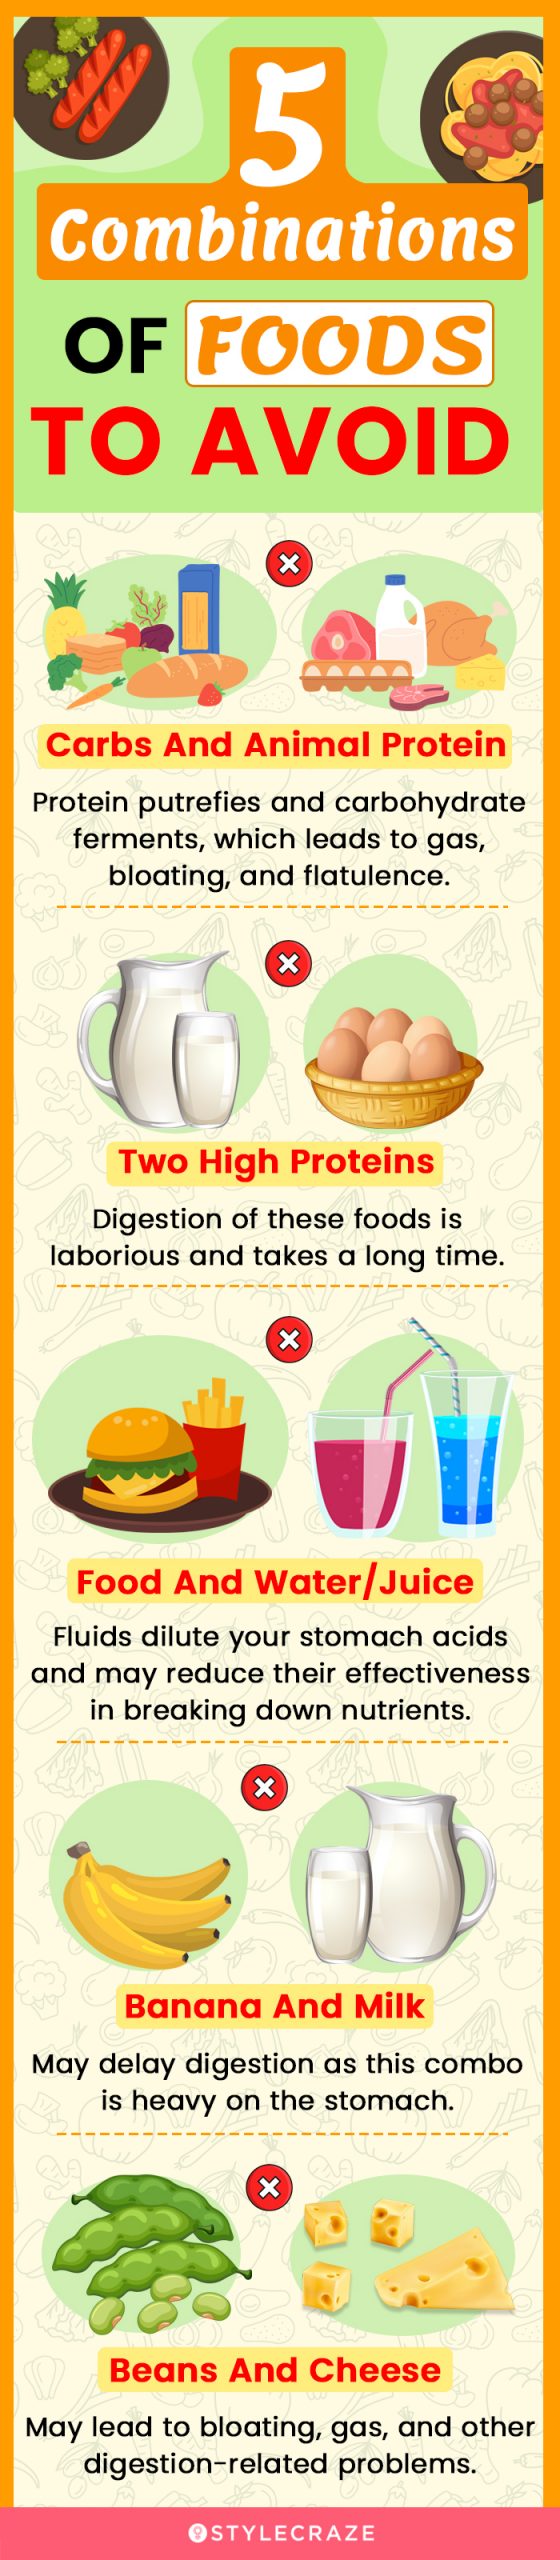 5 combinations of foods to avoid (infographic)